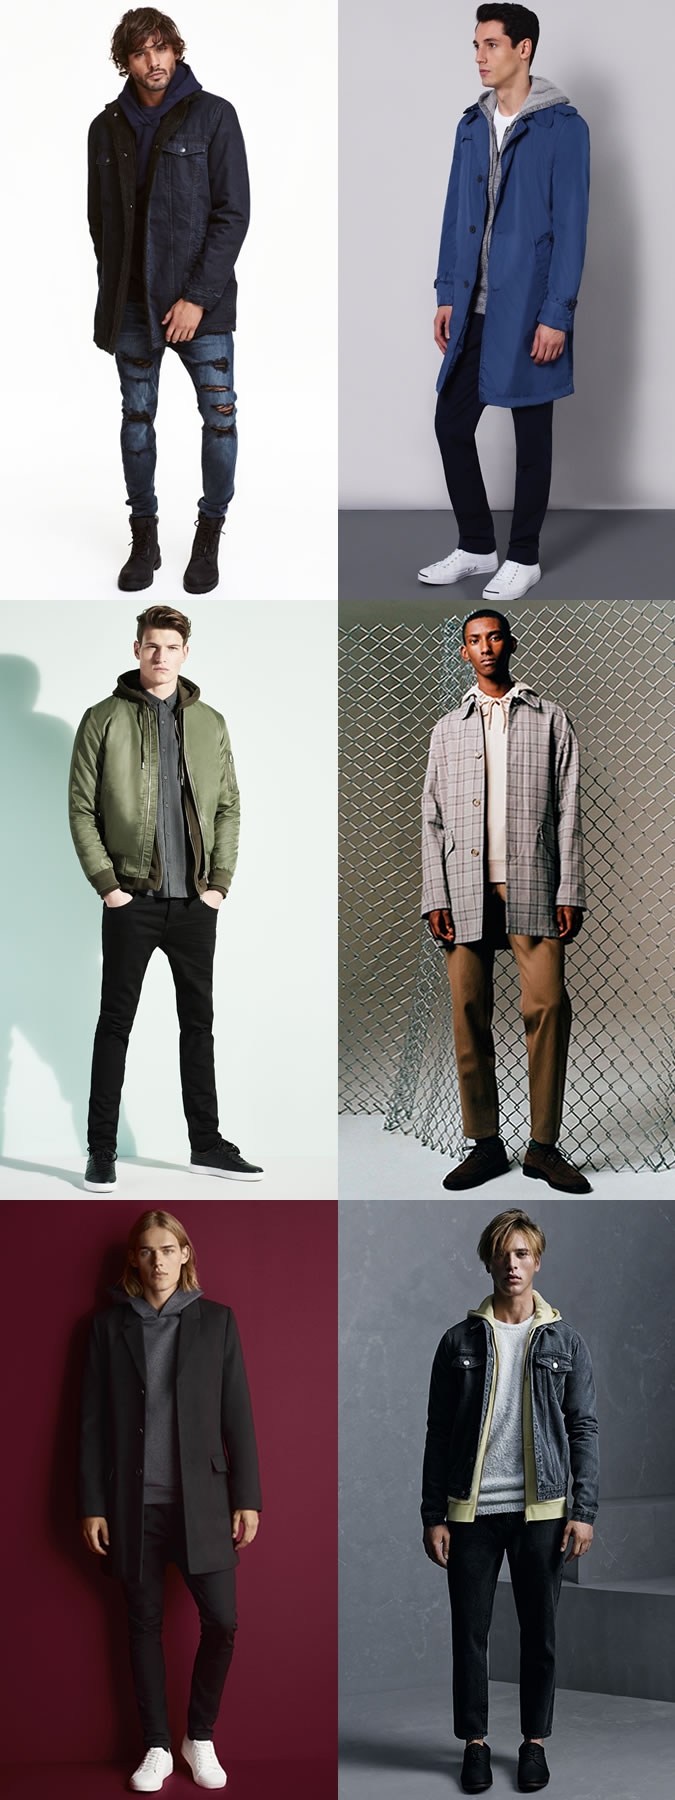 How to match hoodies for men in this fall 2021?